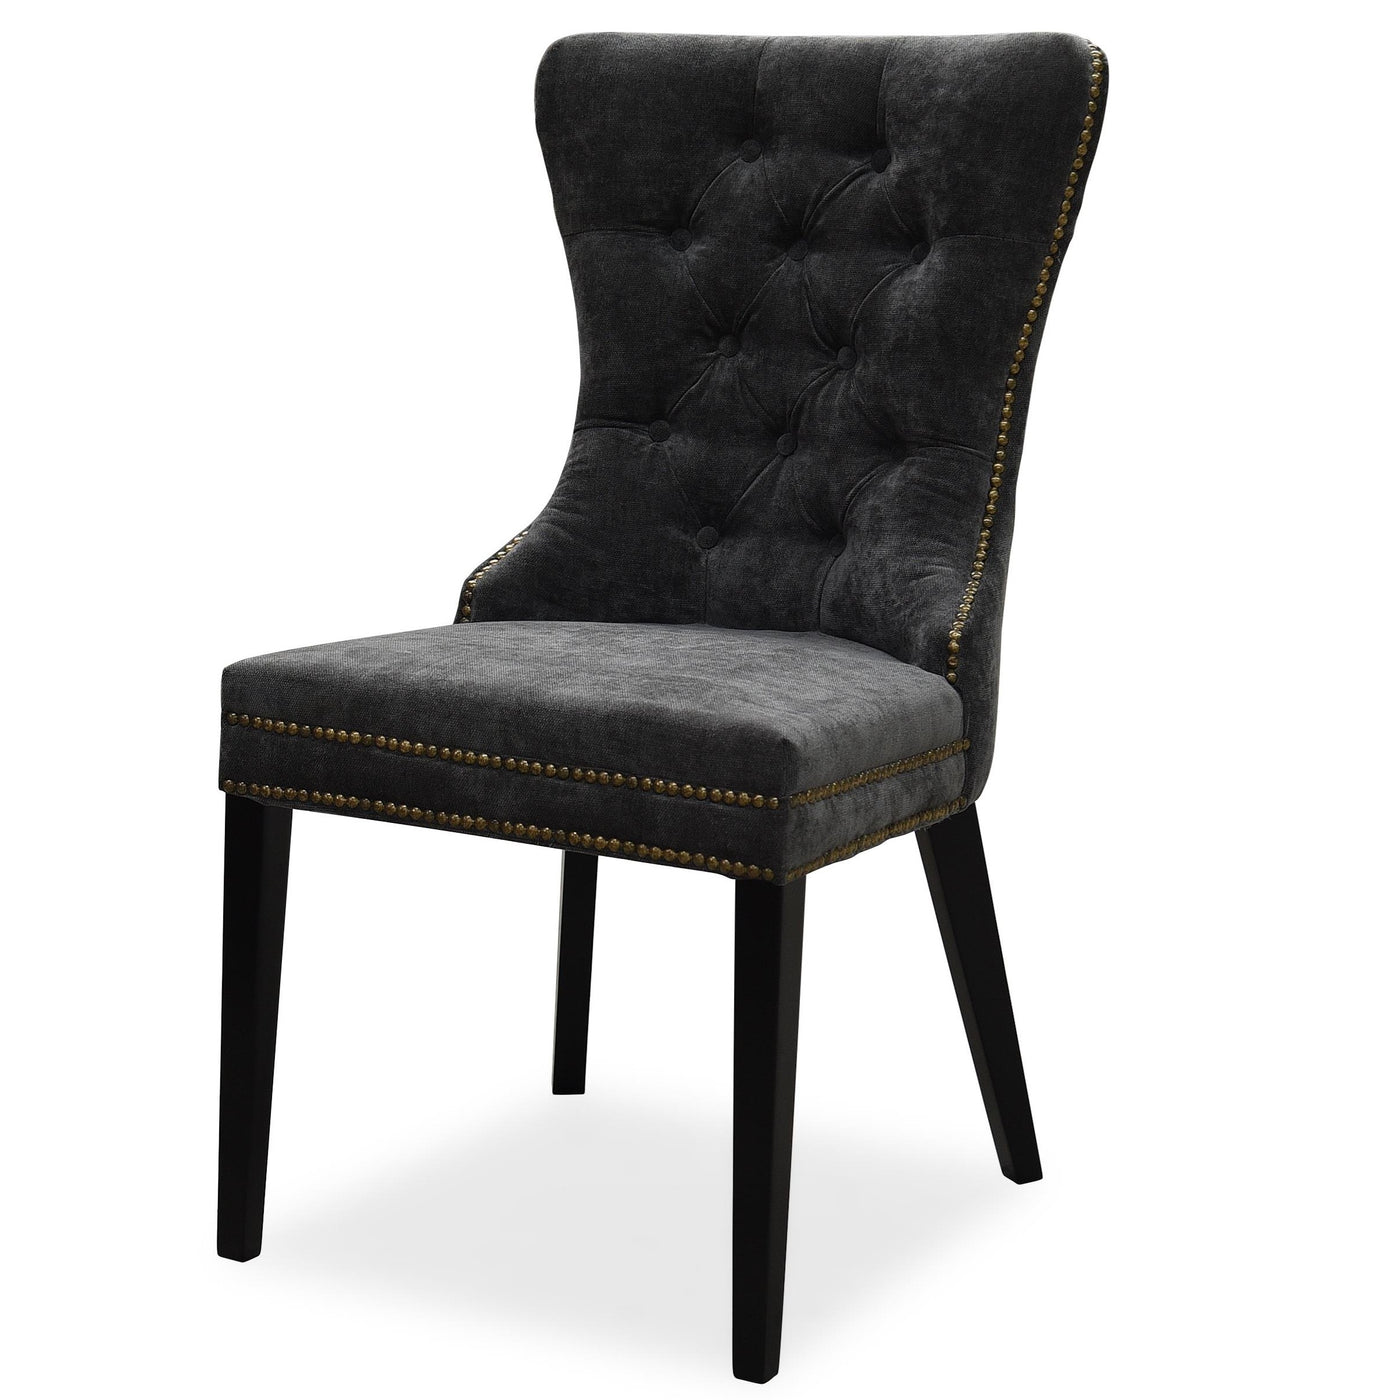 Luciano Dining Chair Charcoal